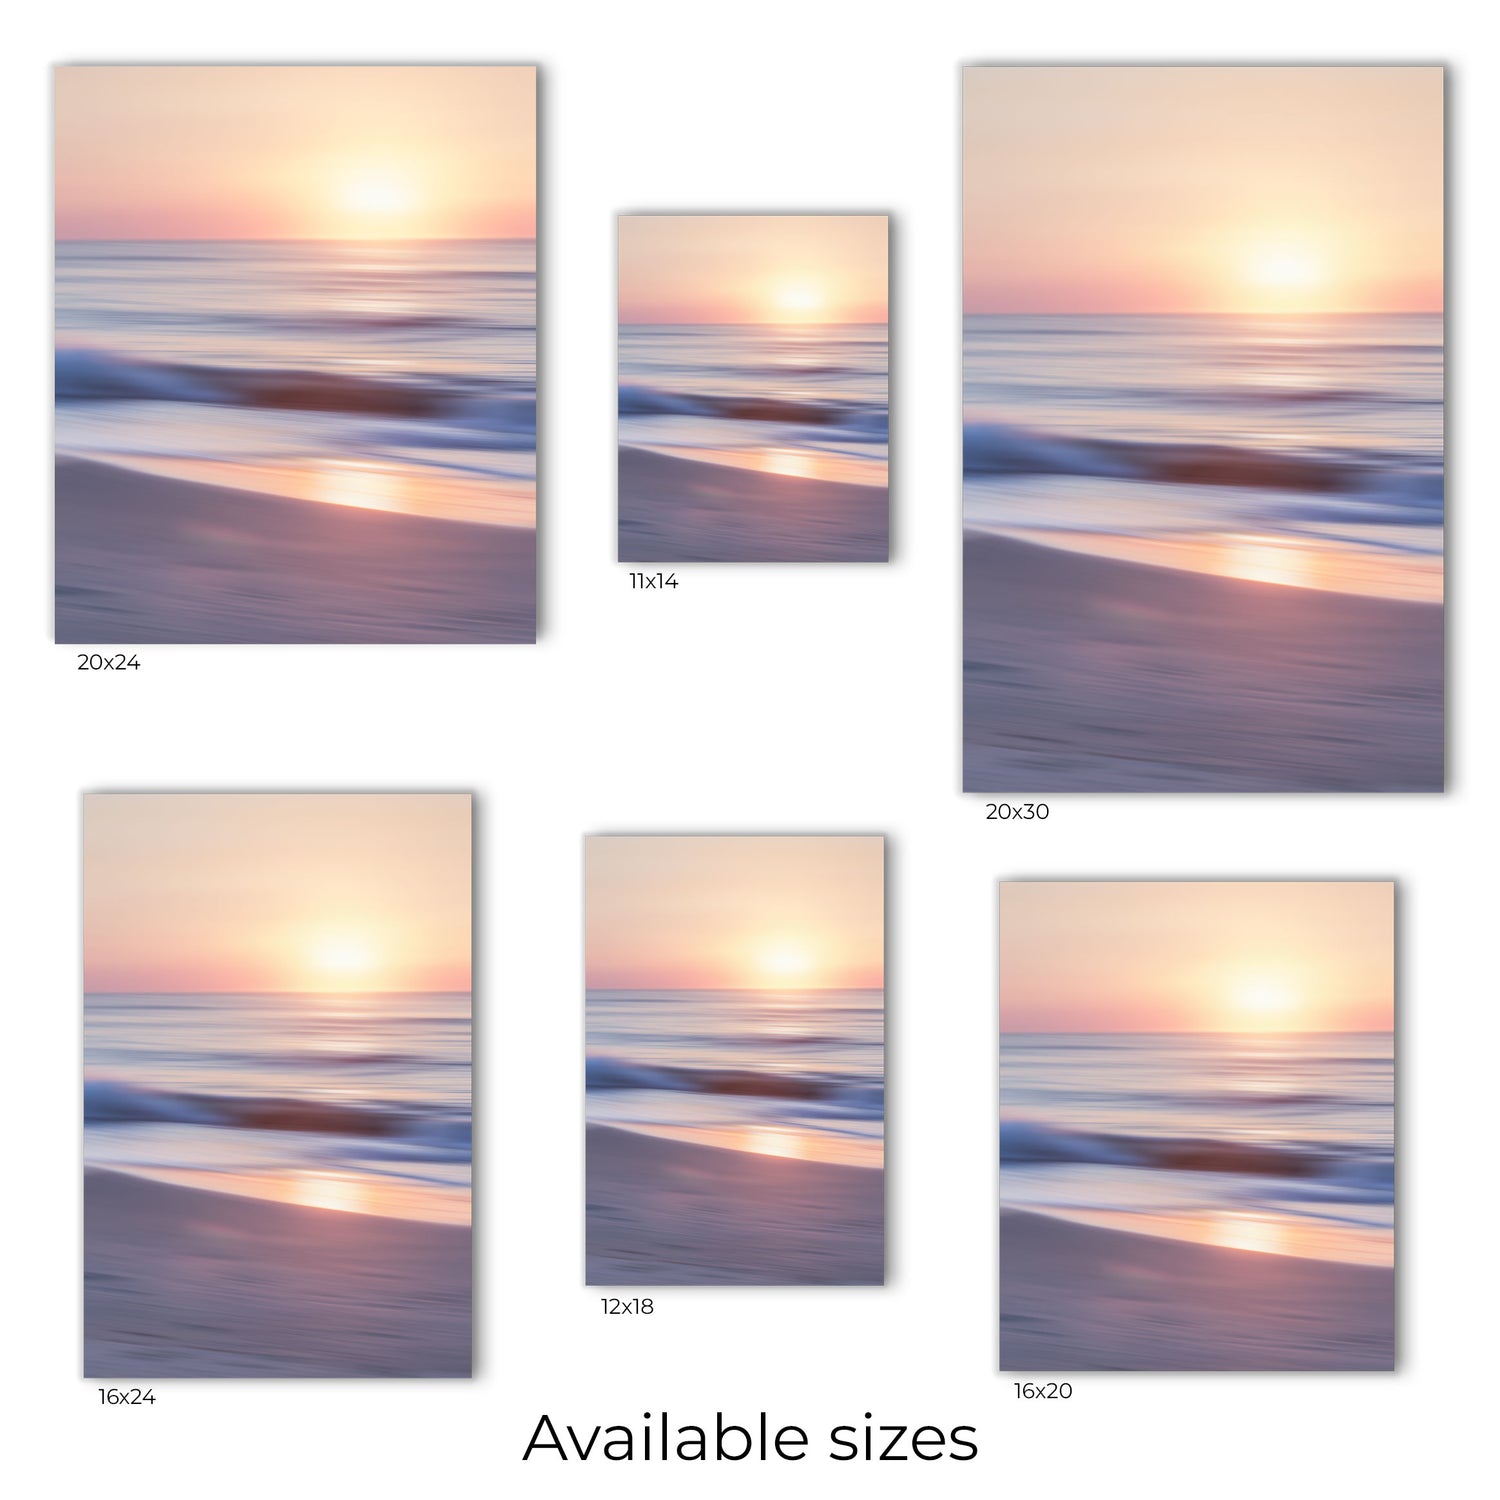 "Visual representation of North Carolina inspired Ocean Sunrise canvas wall art print, available in sizes: 11x14, 12x18, 16x20, 16x24, 20x24, and 20x30.